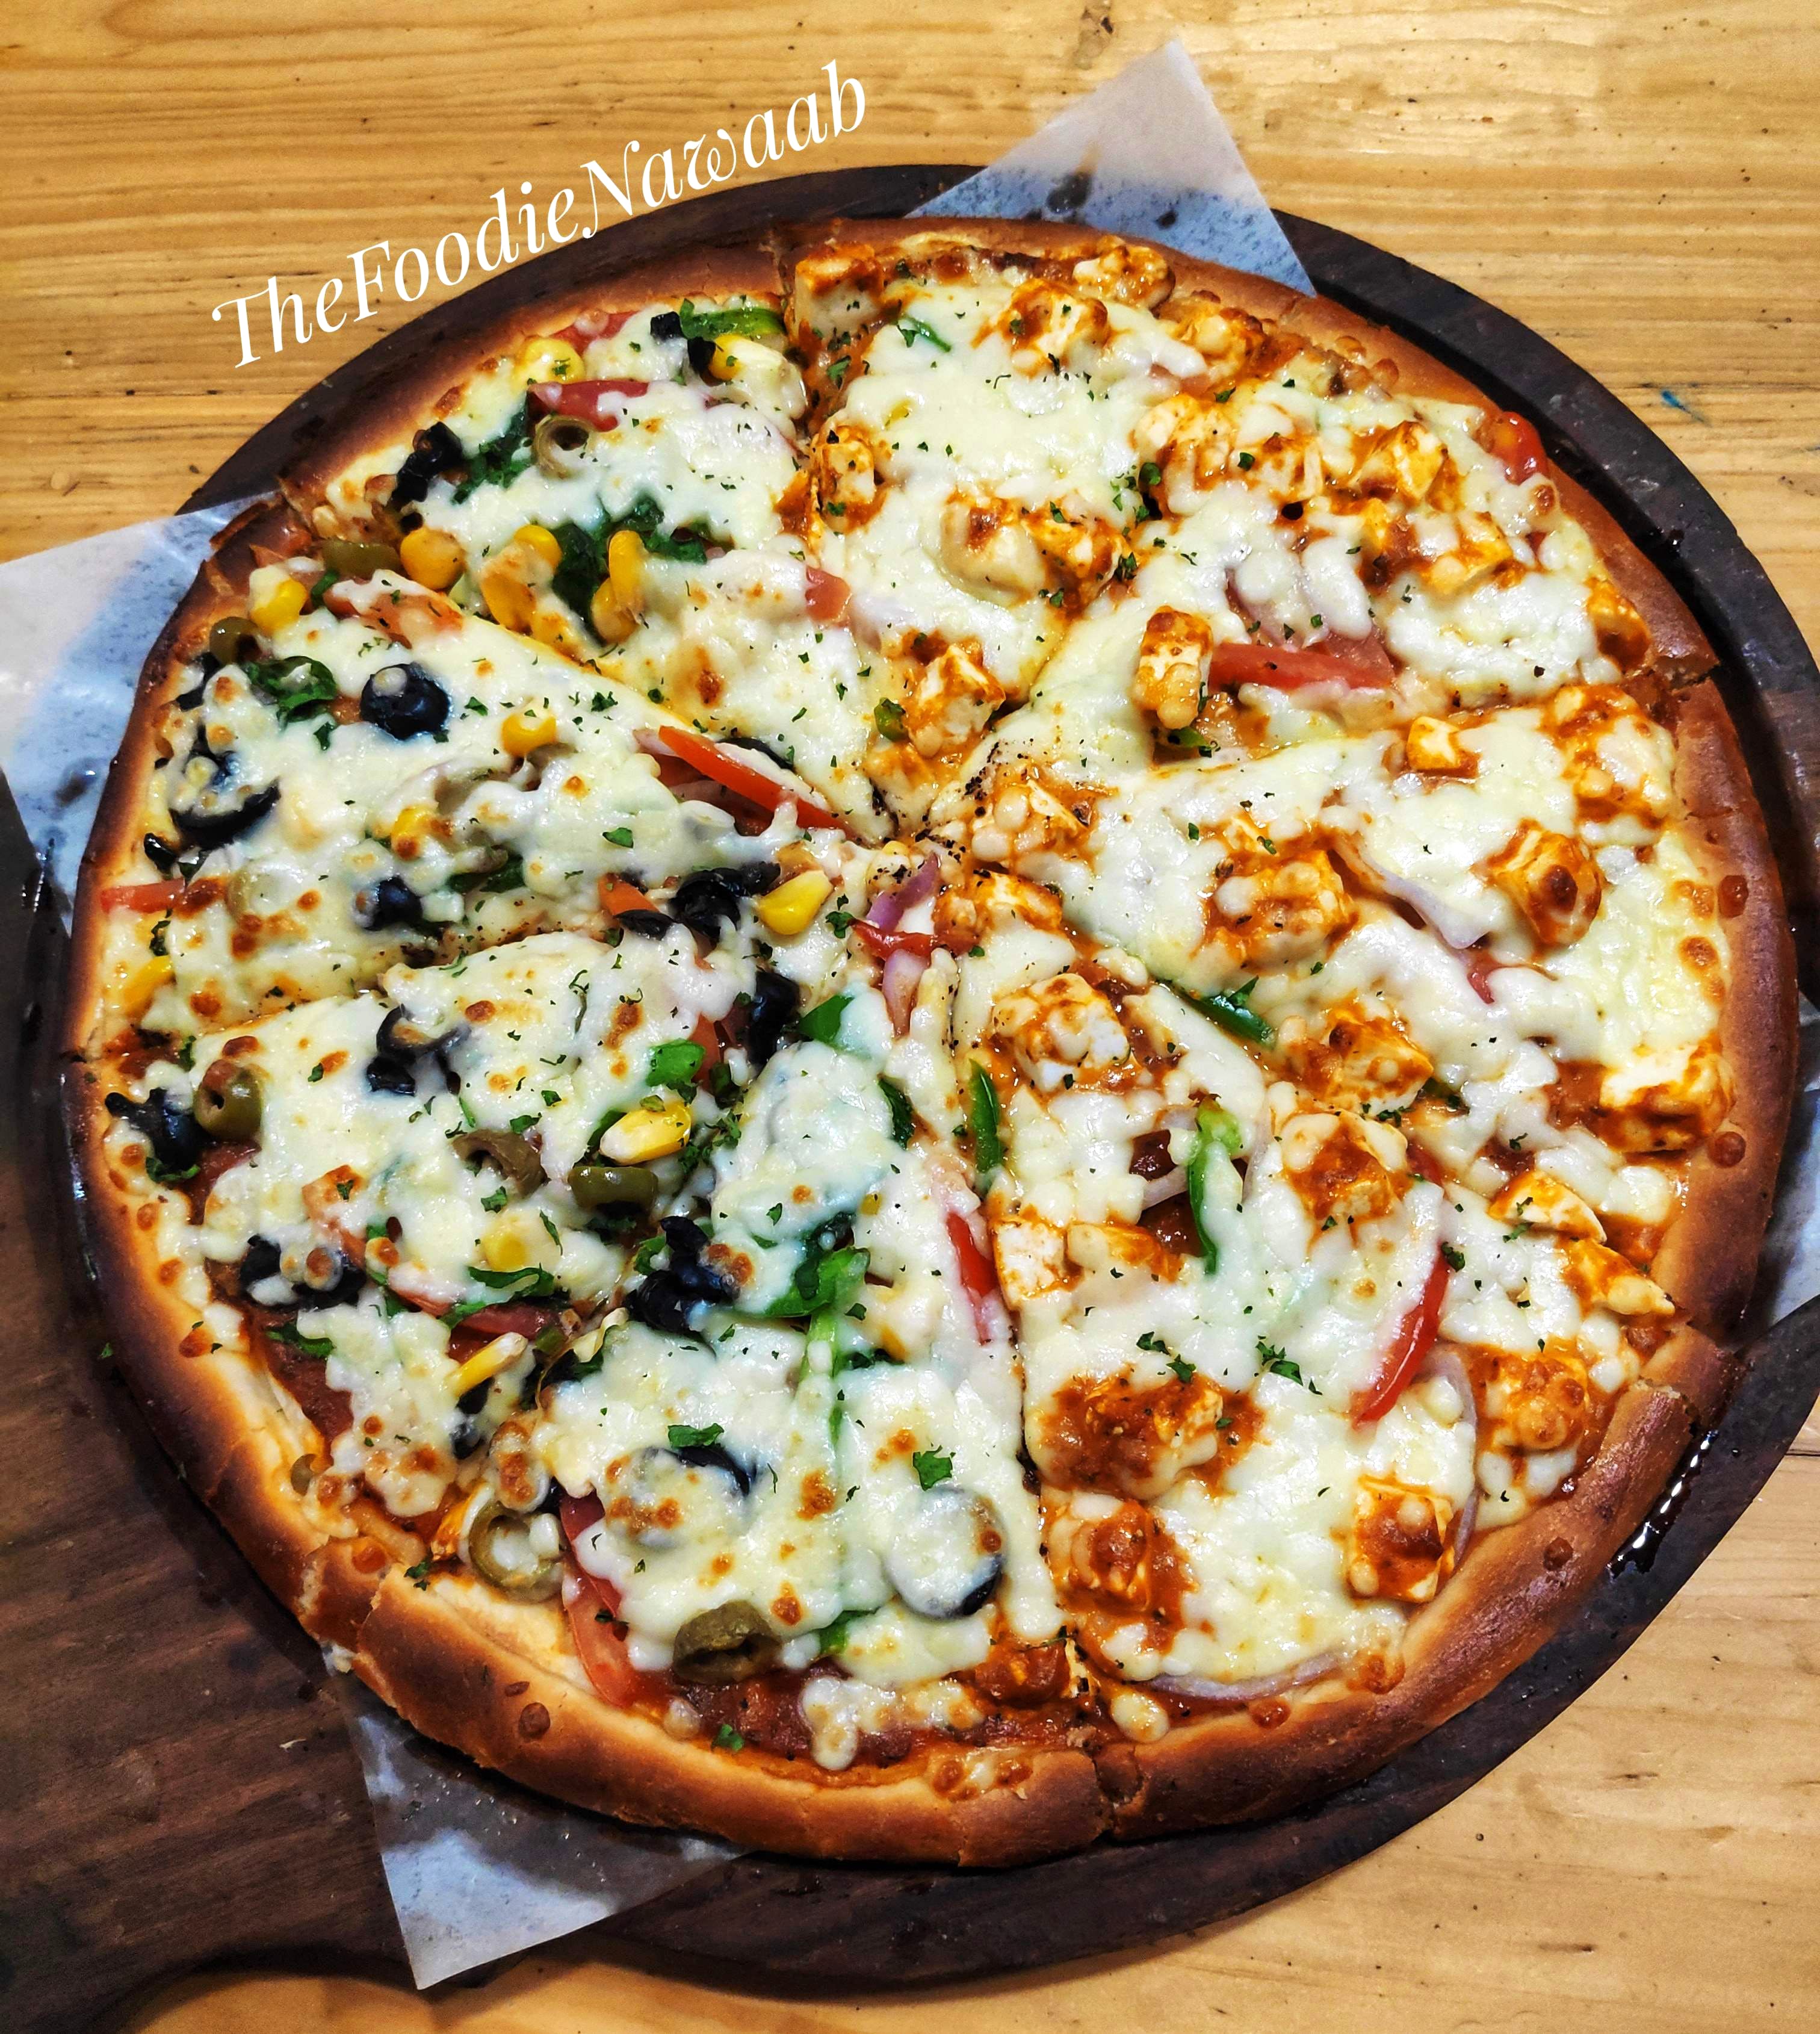 Dish,Food,Pizza,Cuisine,Pizza cheese,California-style pizza,Ingredient,Flatbread,Comfort food,Goat cheese